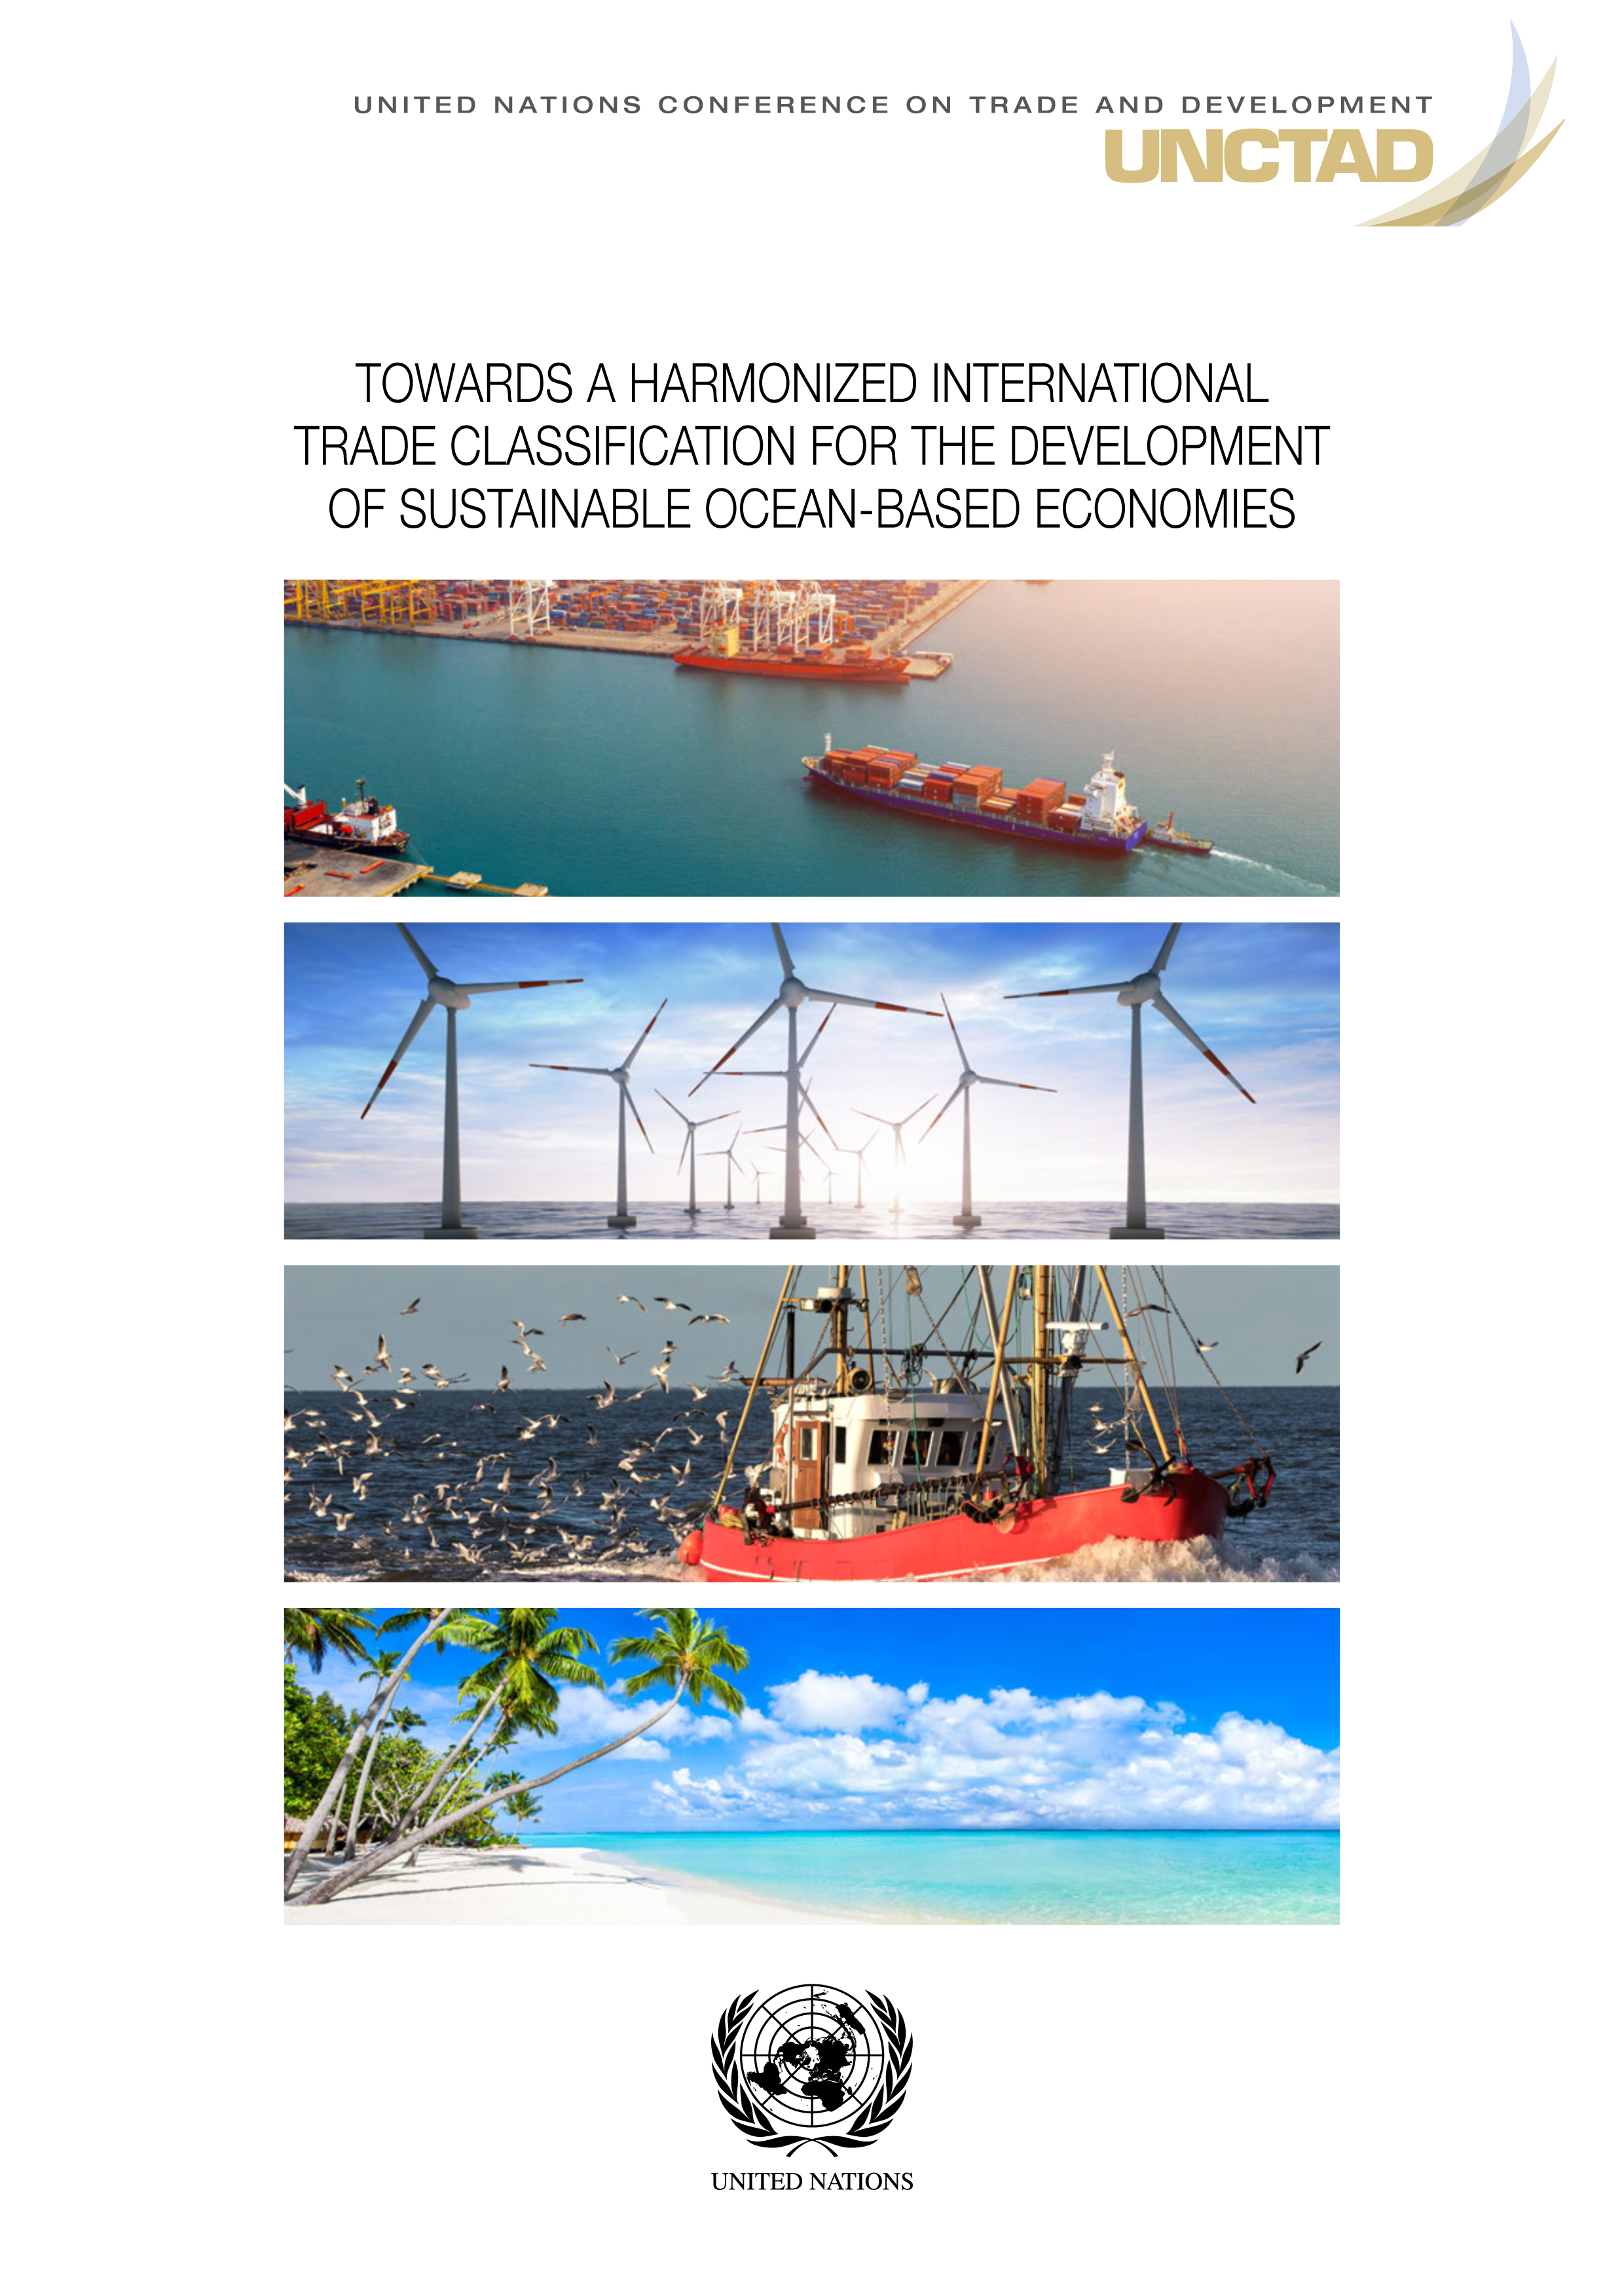 image of Towards a Harmonized International Trade Classification for the Development of Sustainable Oceans-based Economies